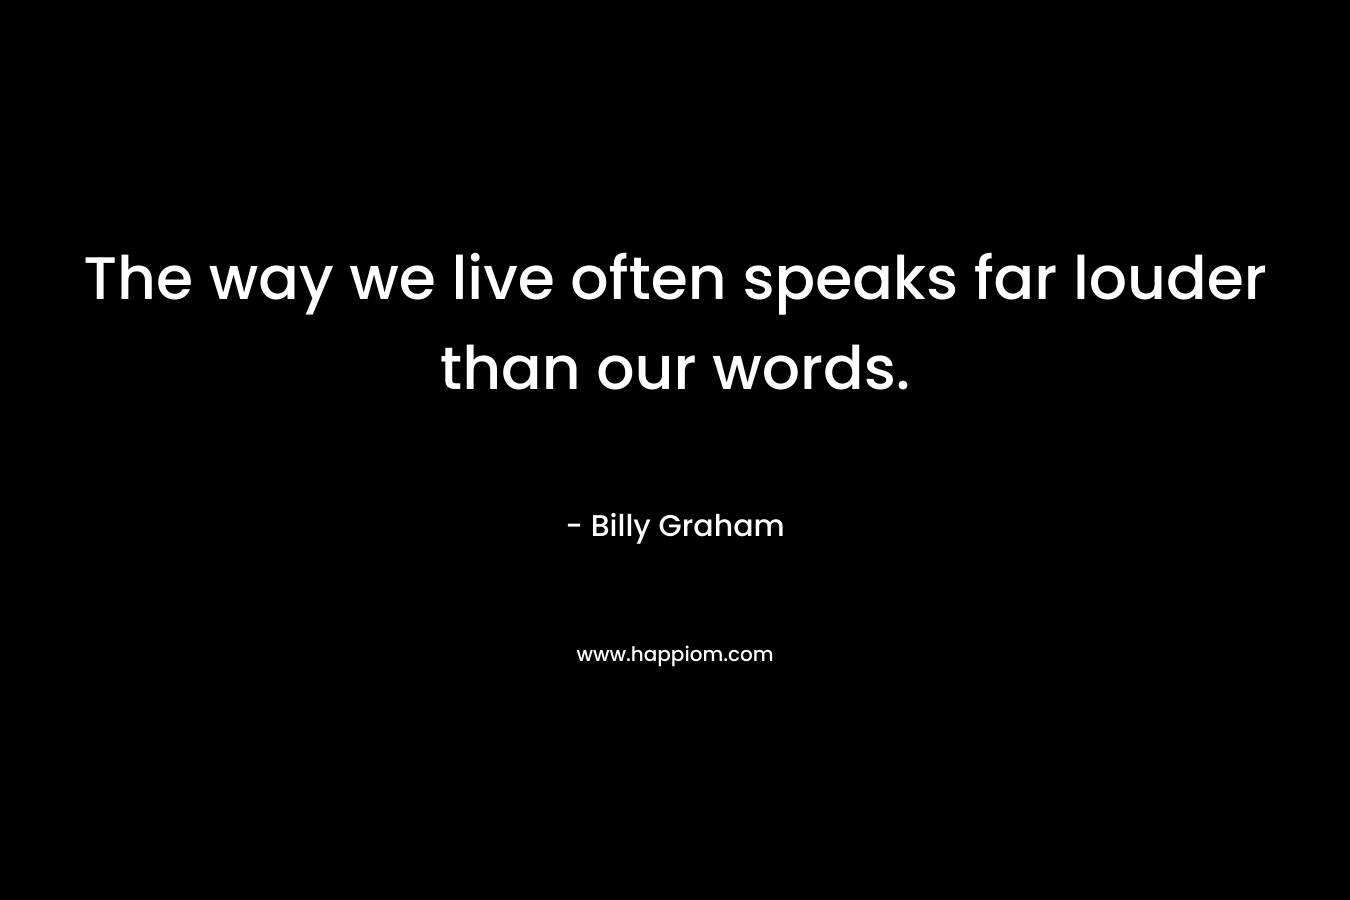 The way we live often speaks far louder than our words.